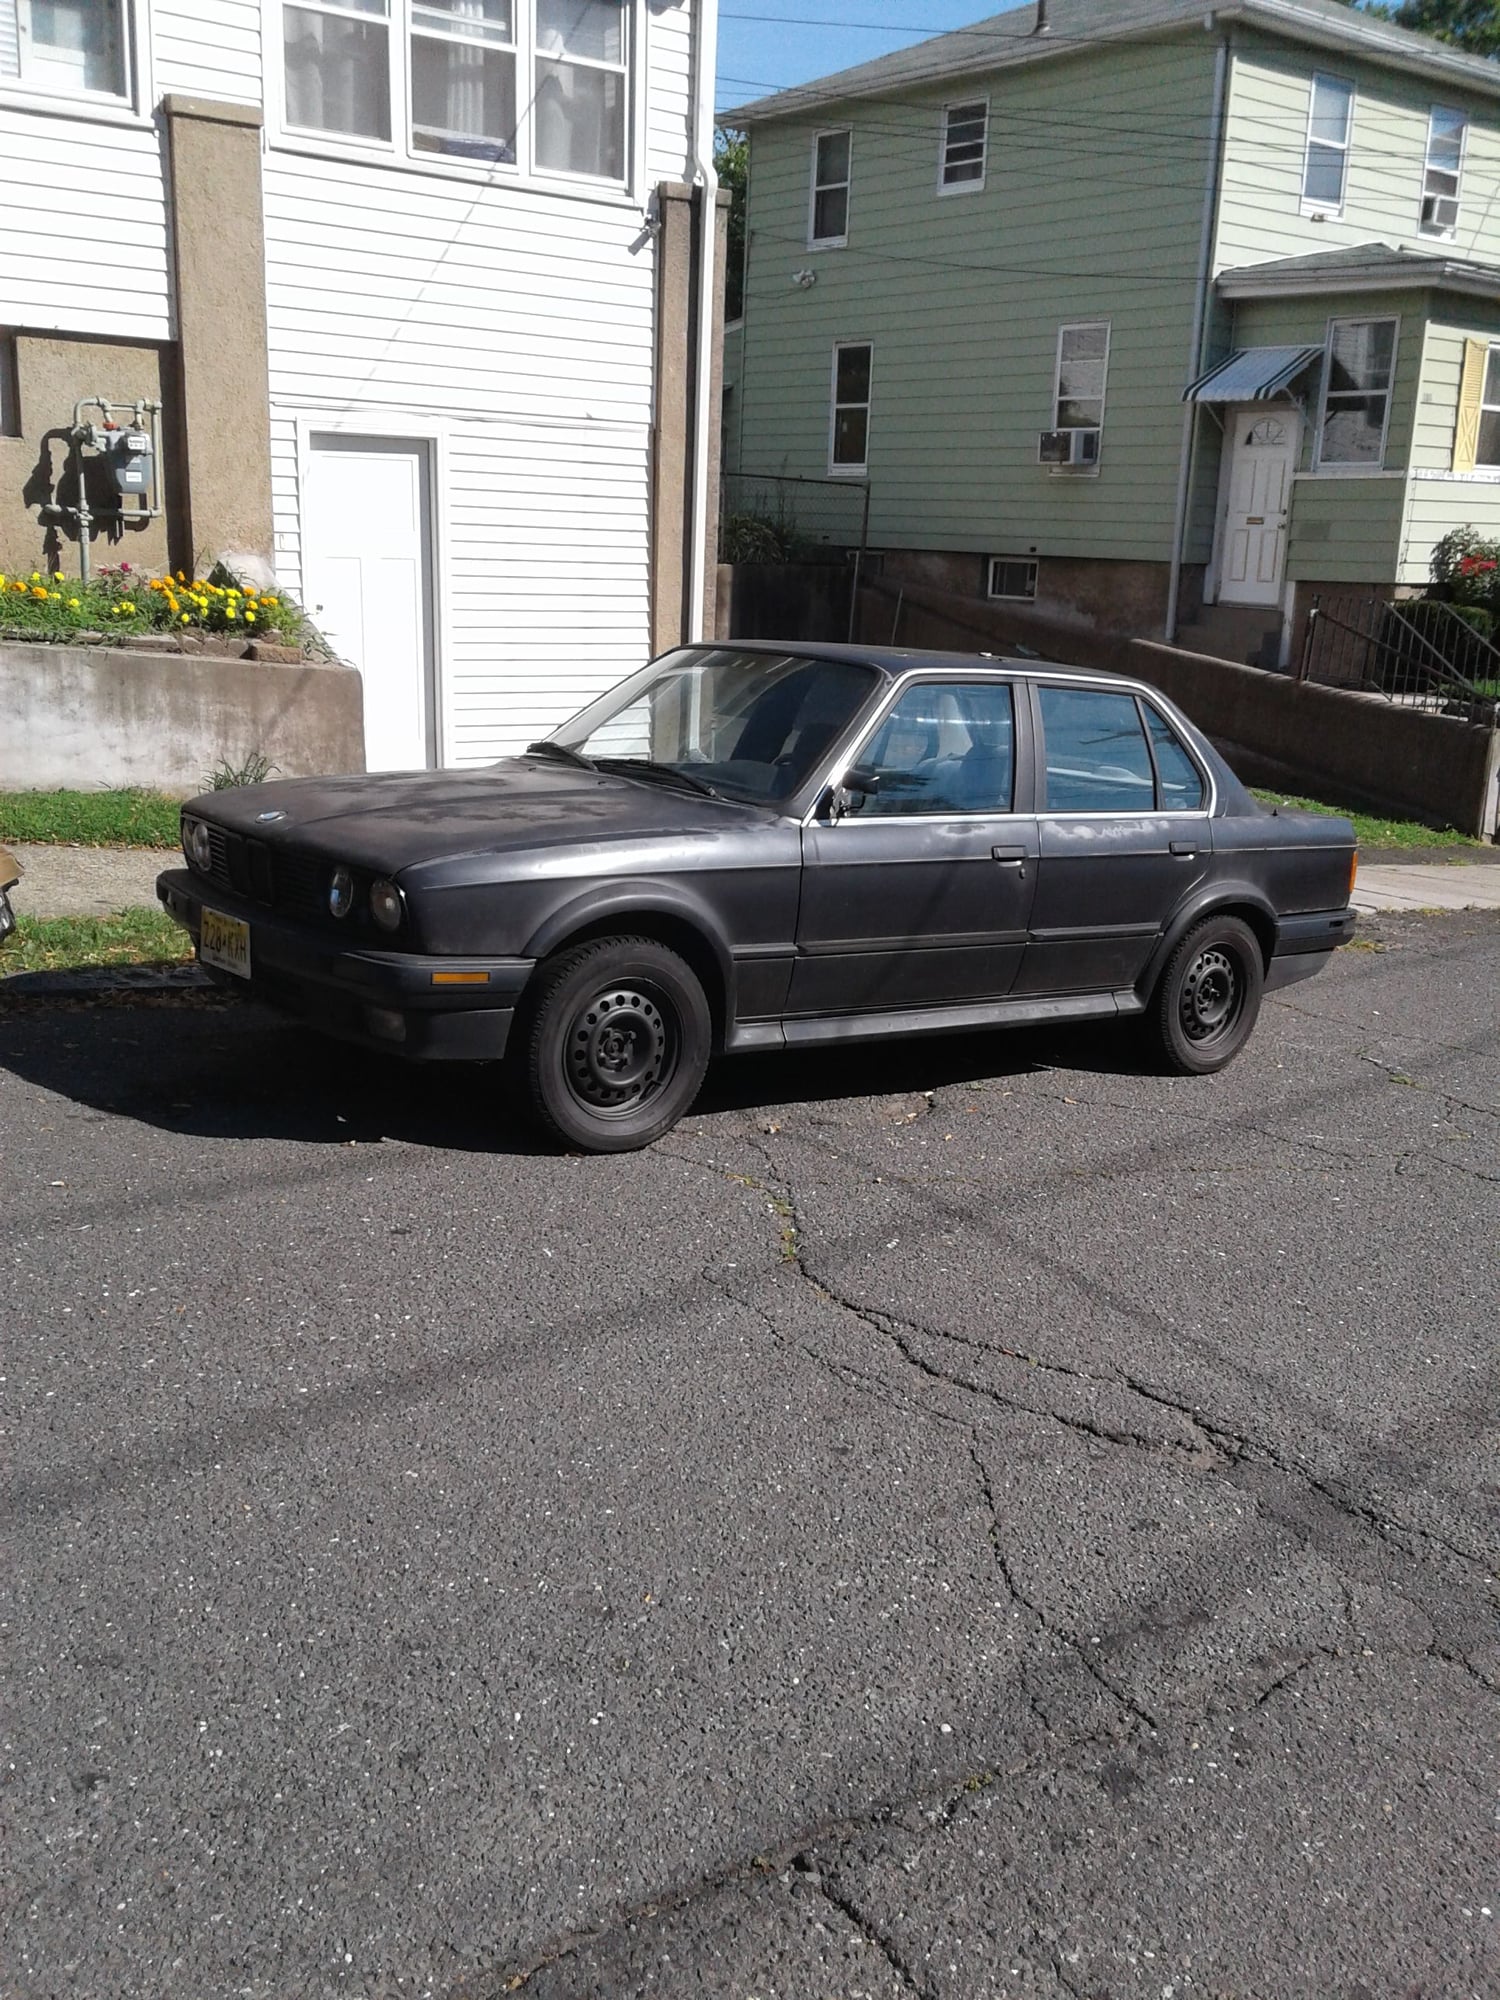 Engine - Power Adders - Interested in trading e30 325ix for Fp black and turbo manifold - Used - 1989 BMW 325iX - Paterson, NJ NJ, United States